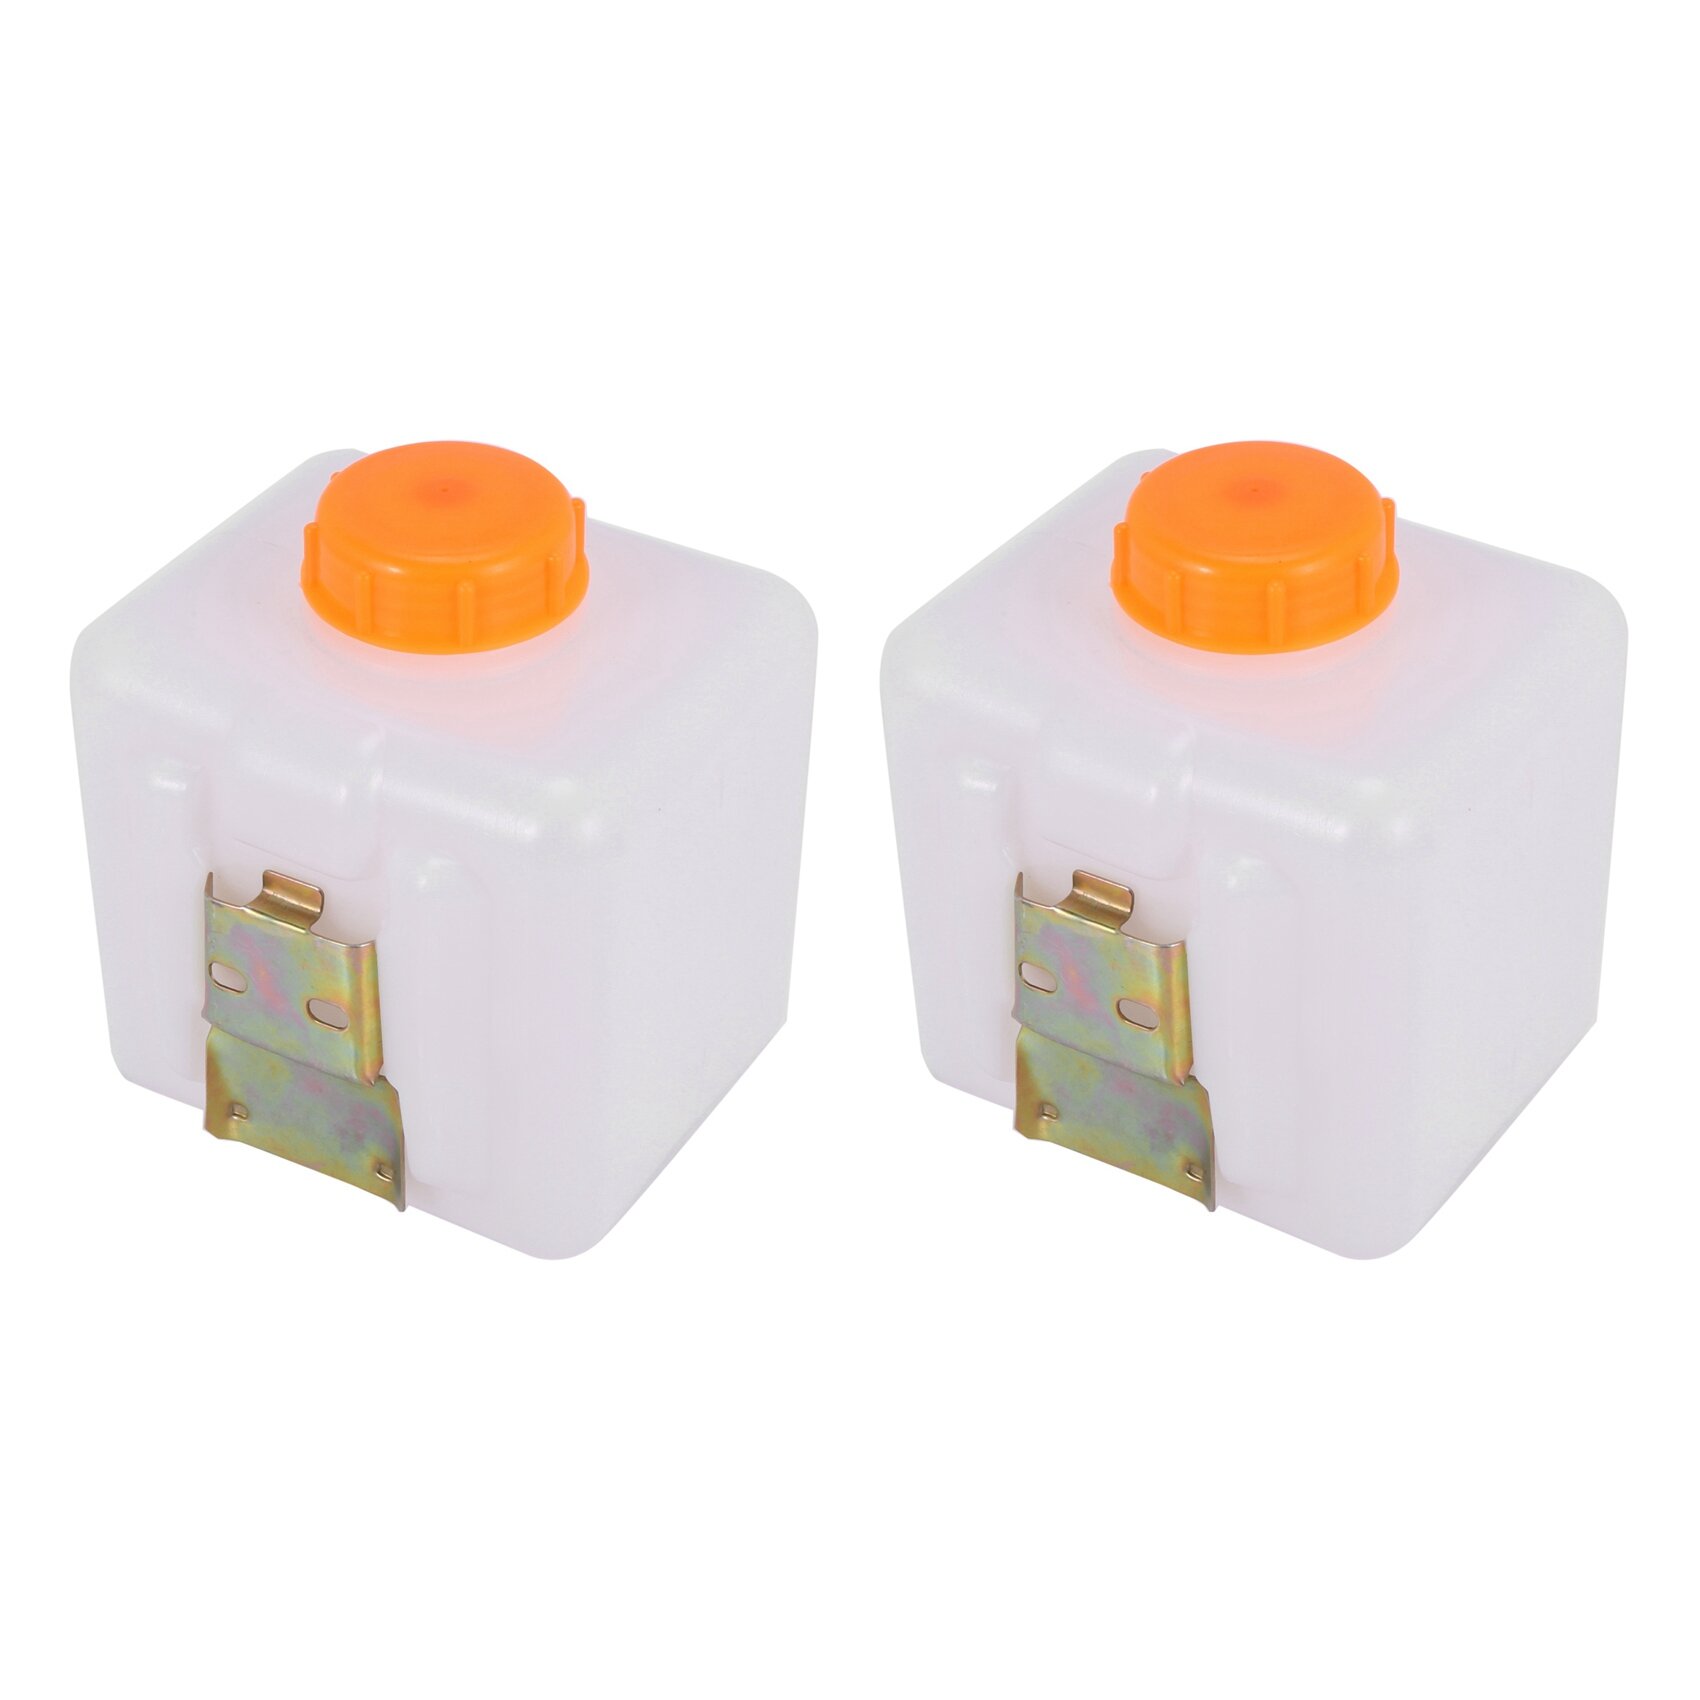 2X 2.5L Plastic Oil Fuel Tank Thicken for Air Gasoline Parking Heater Accessories